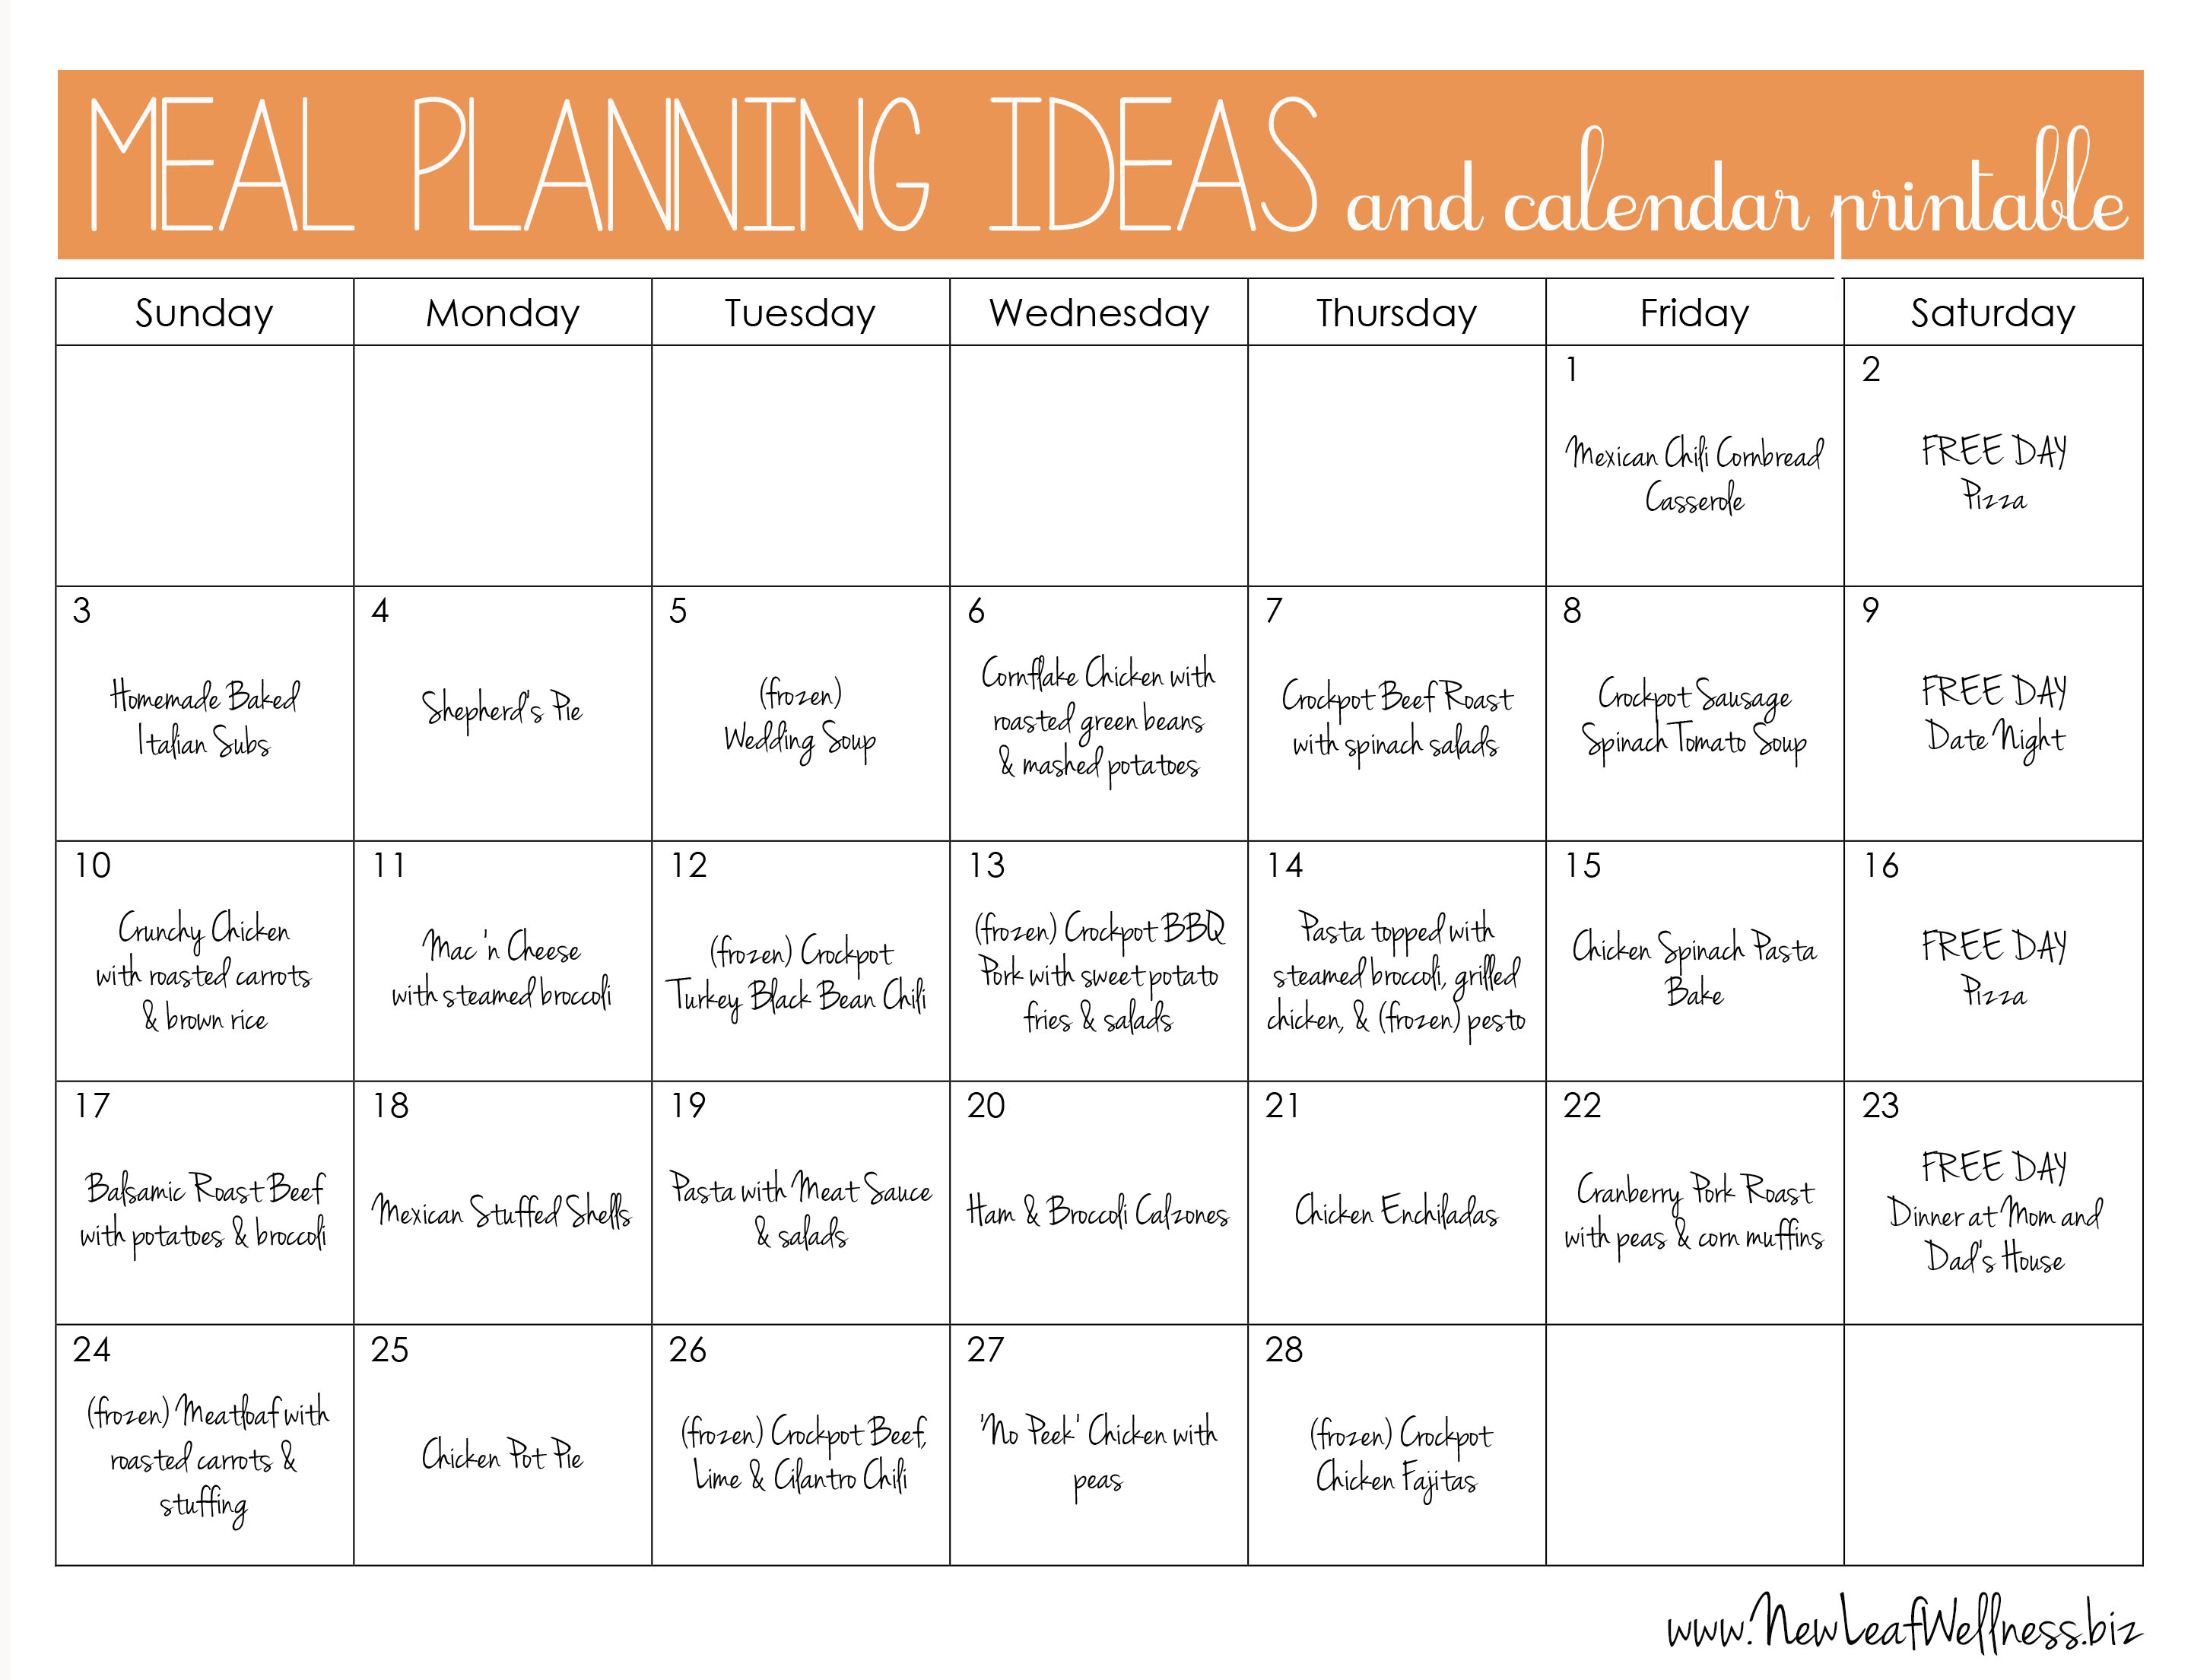 meal planning ideas and calendar printable